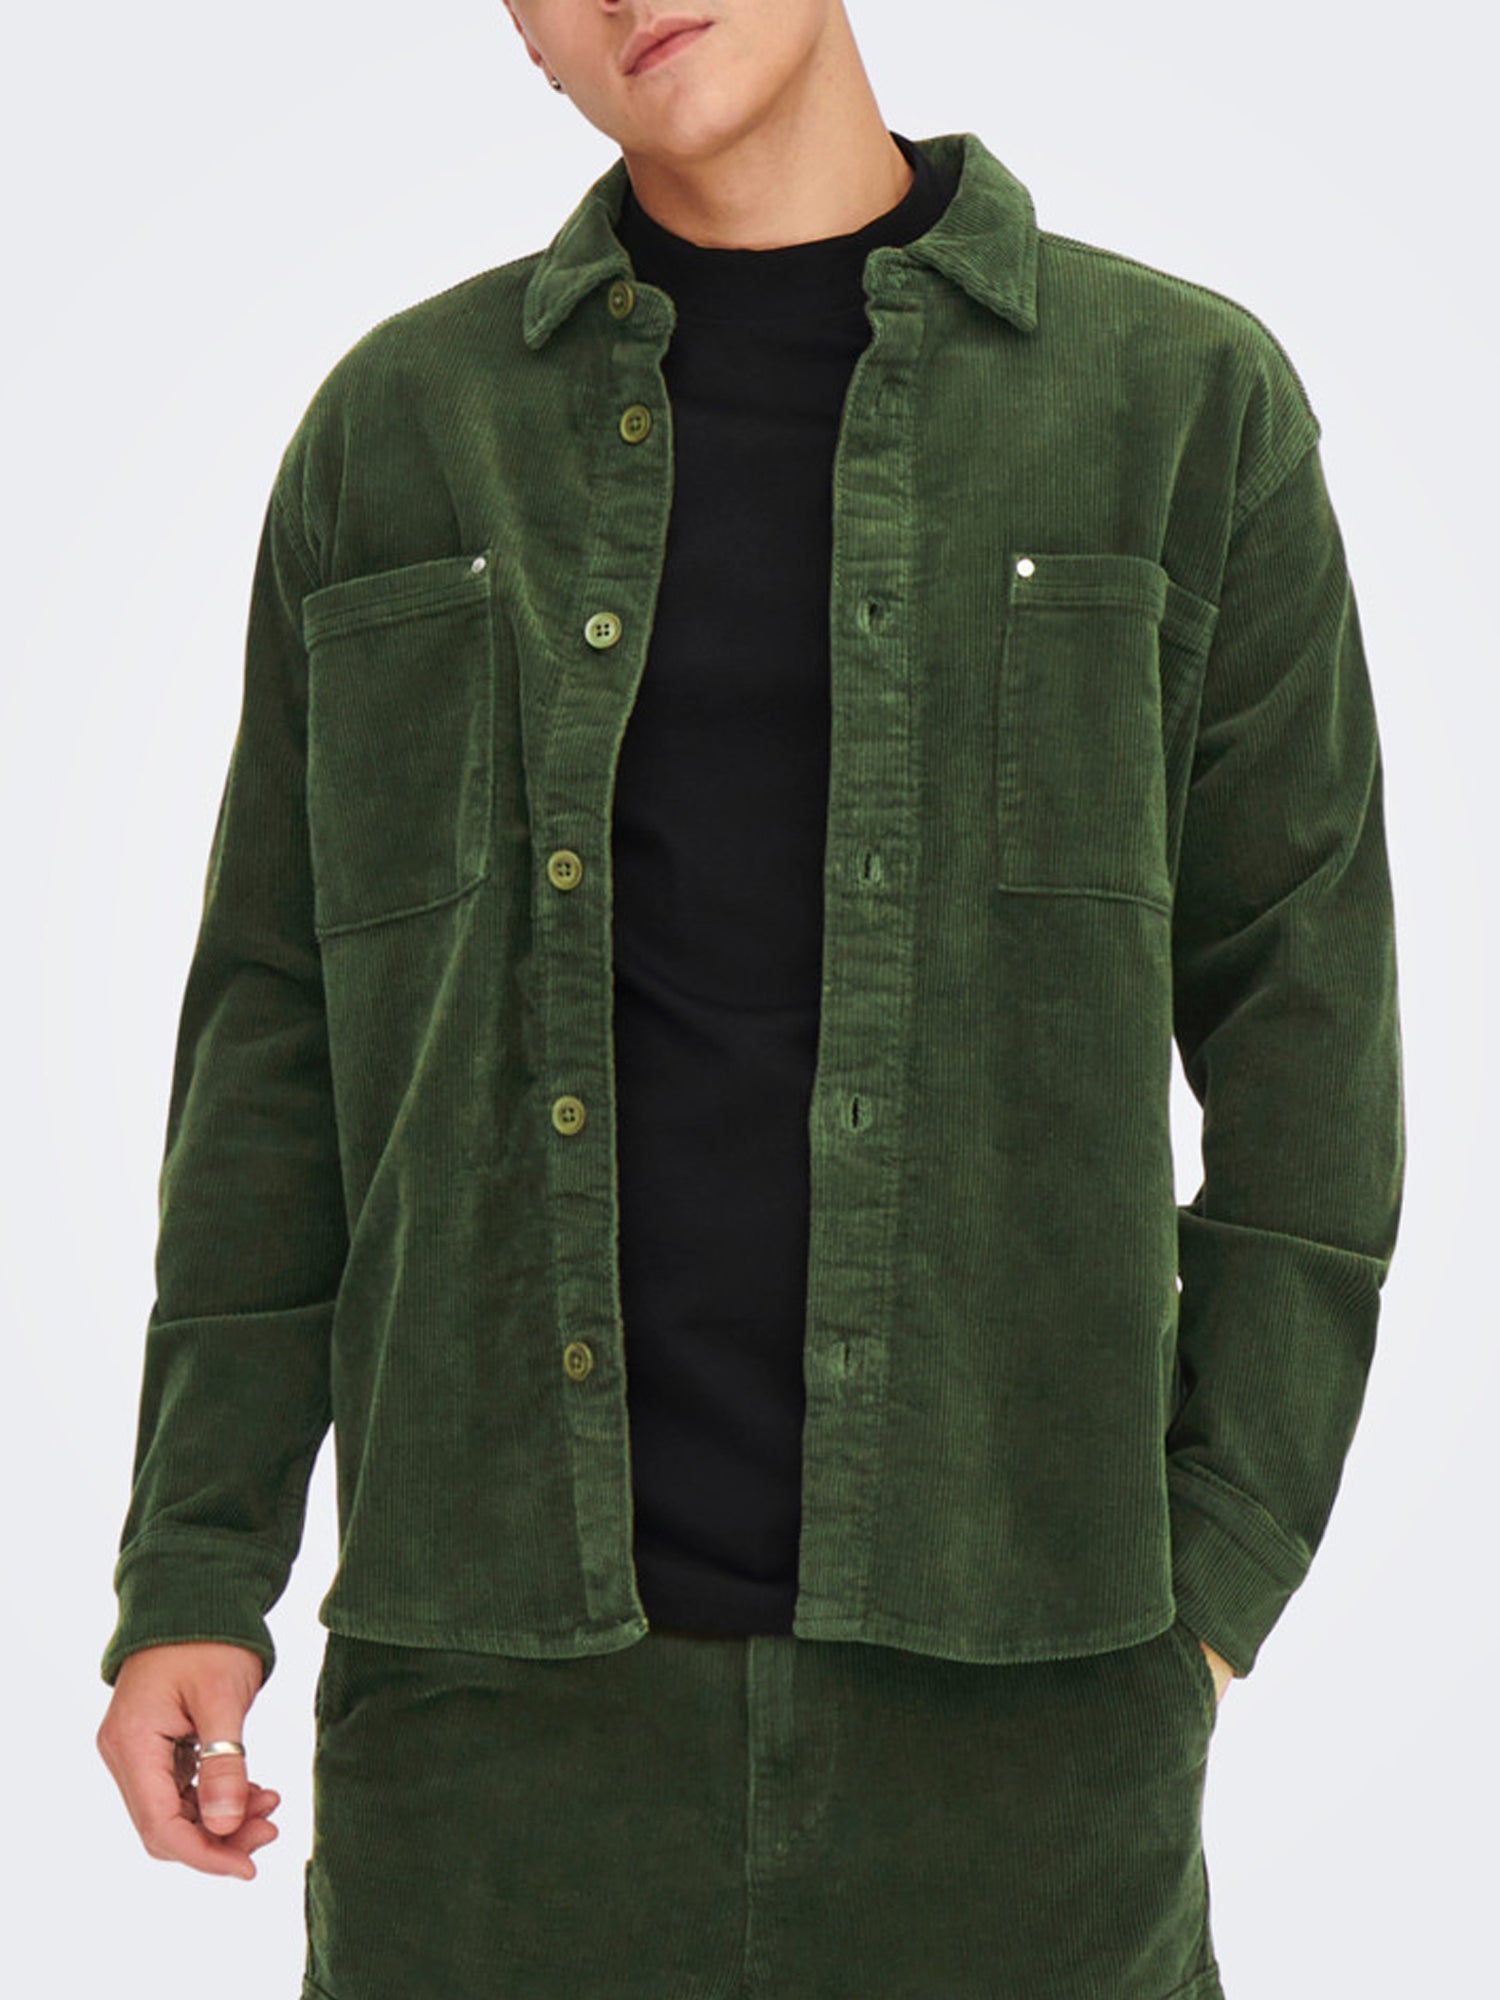 ONLY&SONS CAMICIA TRACK OVER VERDE OLIVA